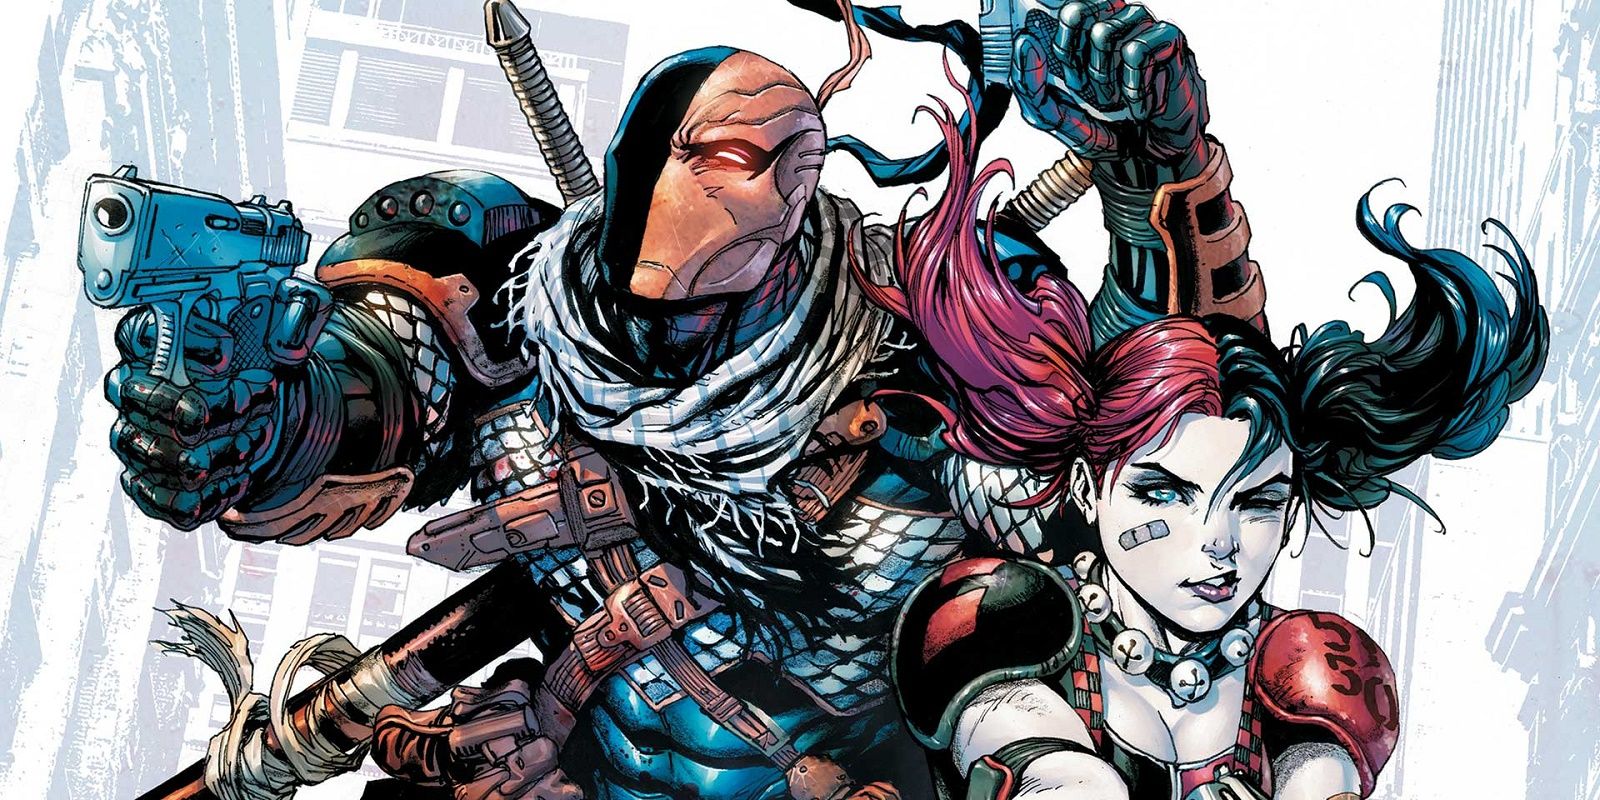 Deathstroke and Harley Quinn appear in DC Comics.